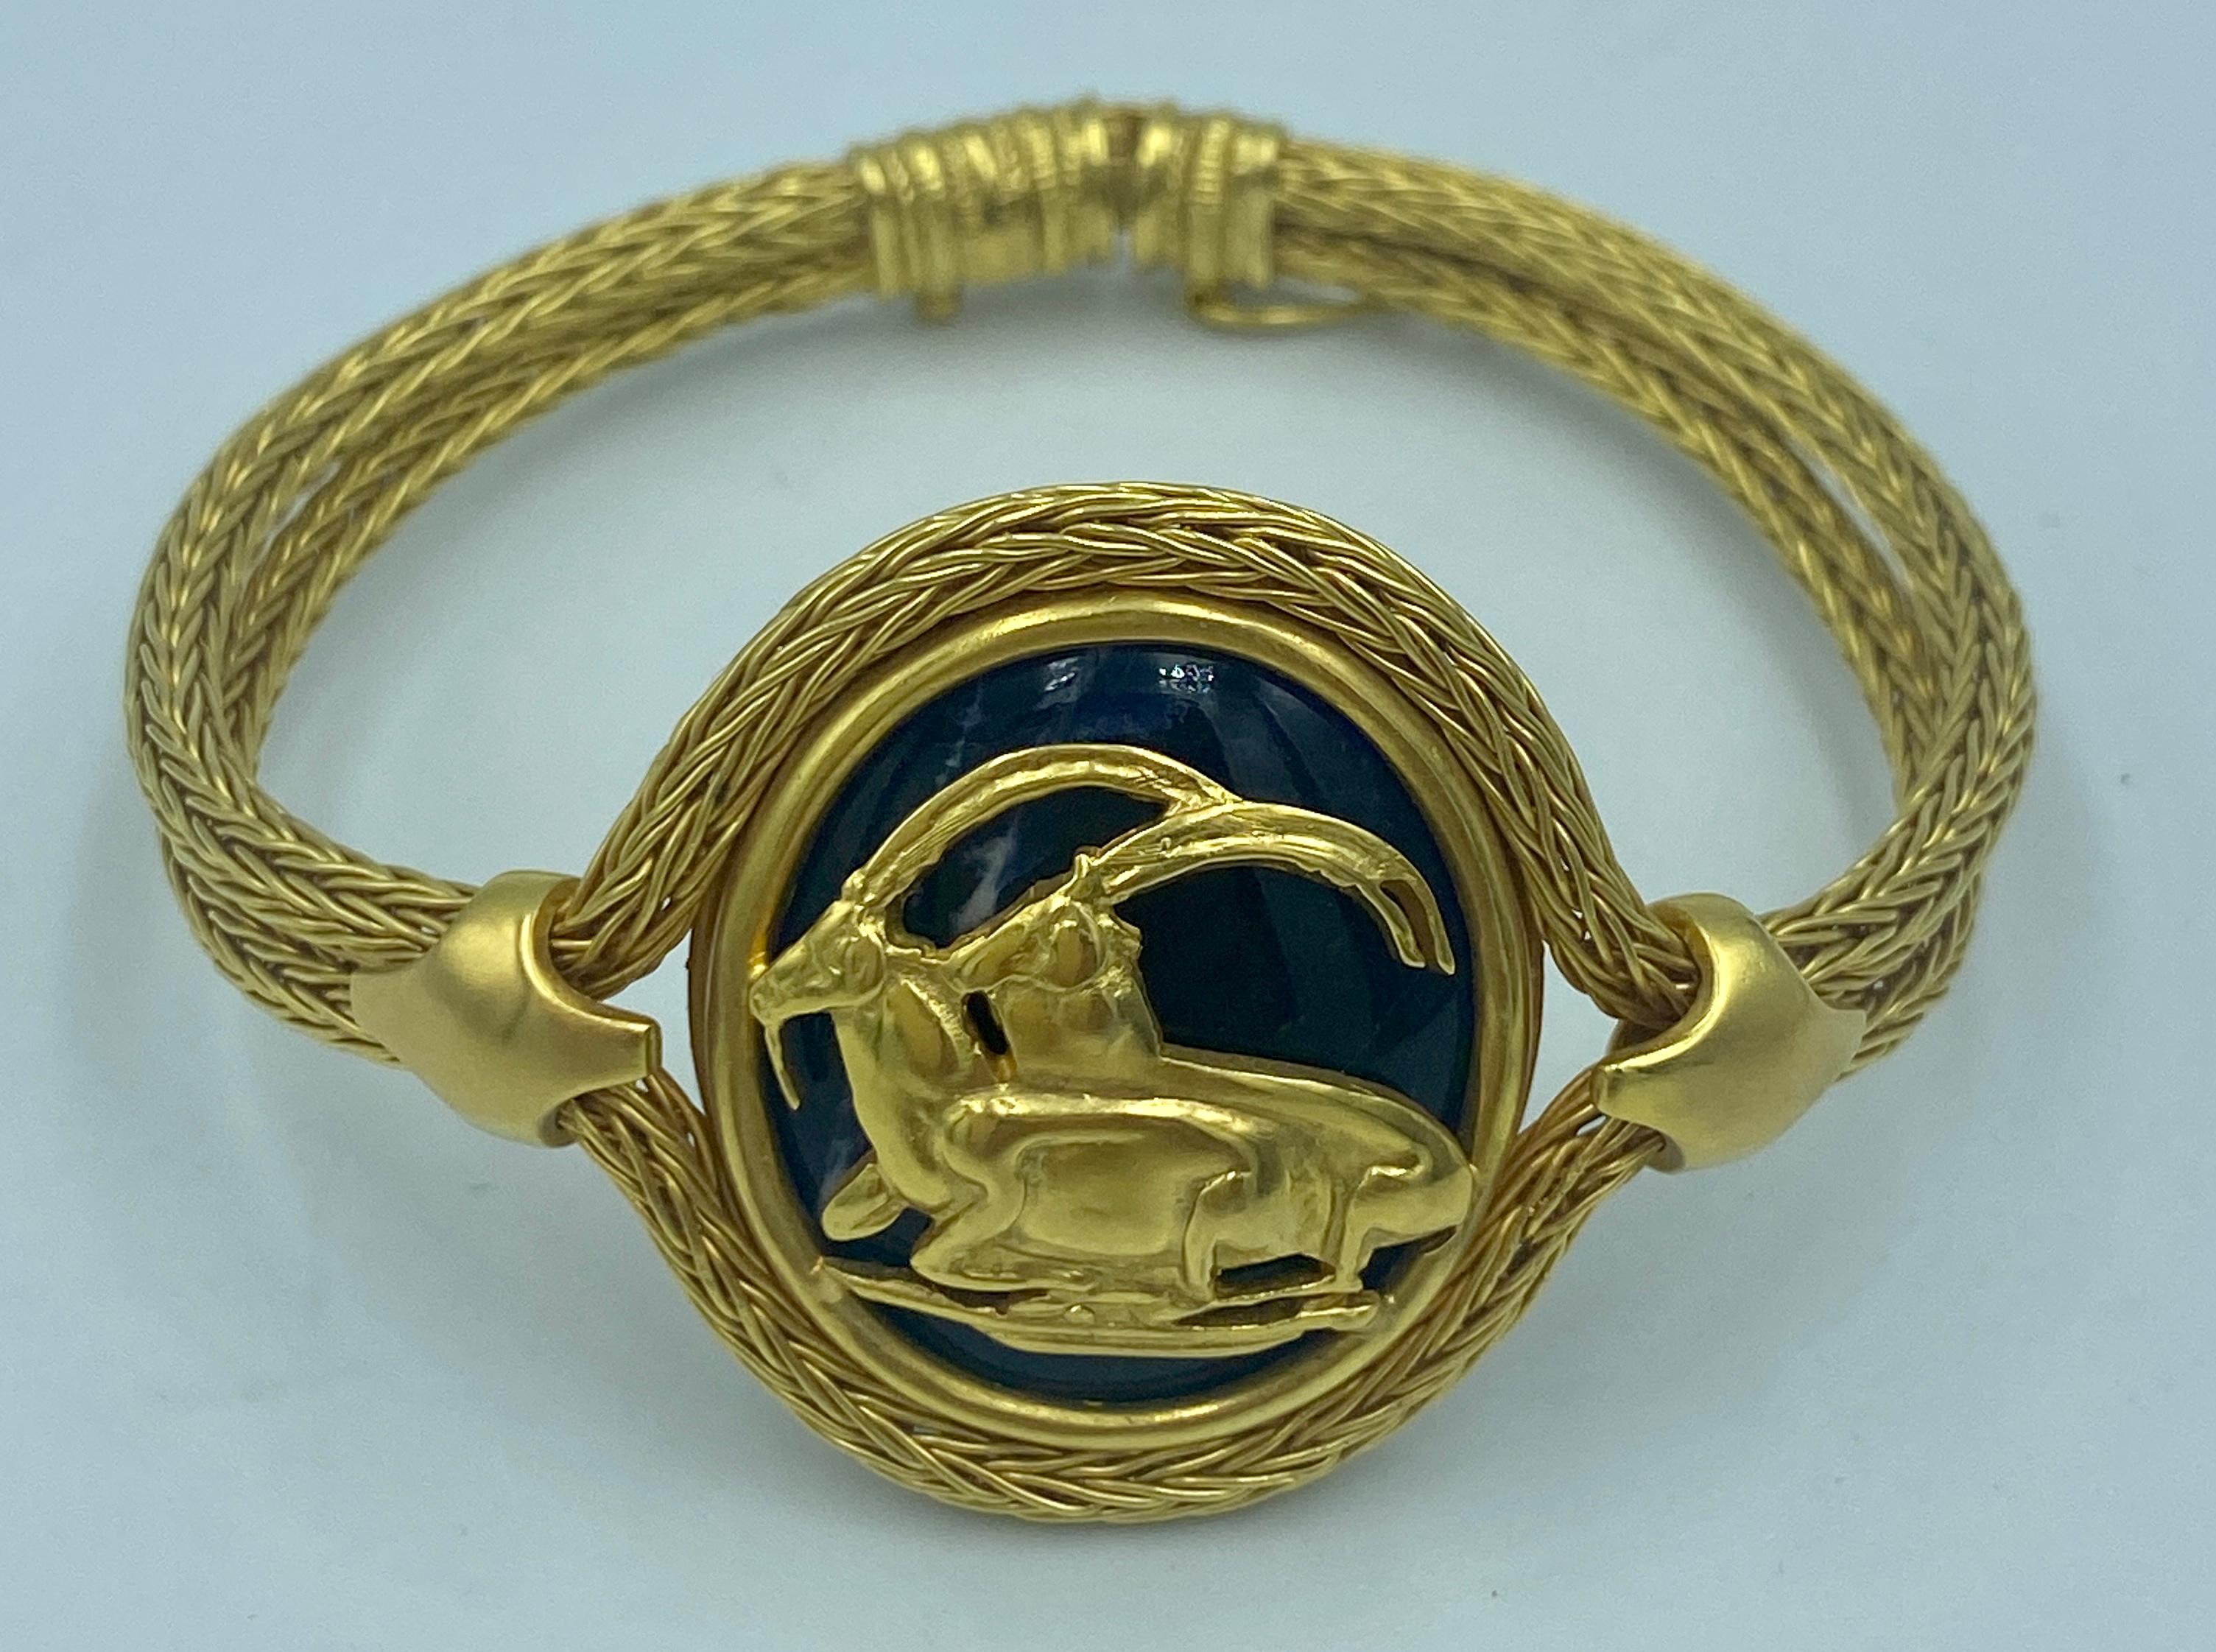 This beautiful 1970s Lalaounis bracelet is in the shape of a medallion with a mountain goat design on it. The medallion is a cabochon lapis lazuli surrounded by 18k woven gold thread which makes up the bracelet.

Intricately made, the bracelet is a